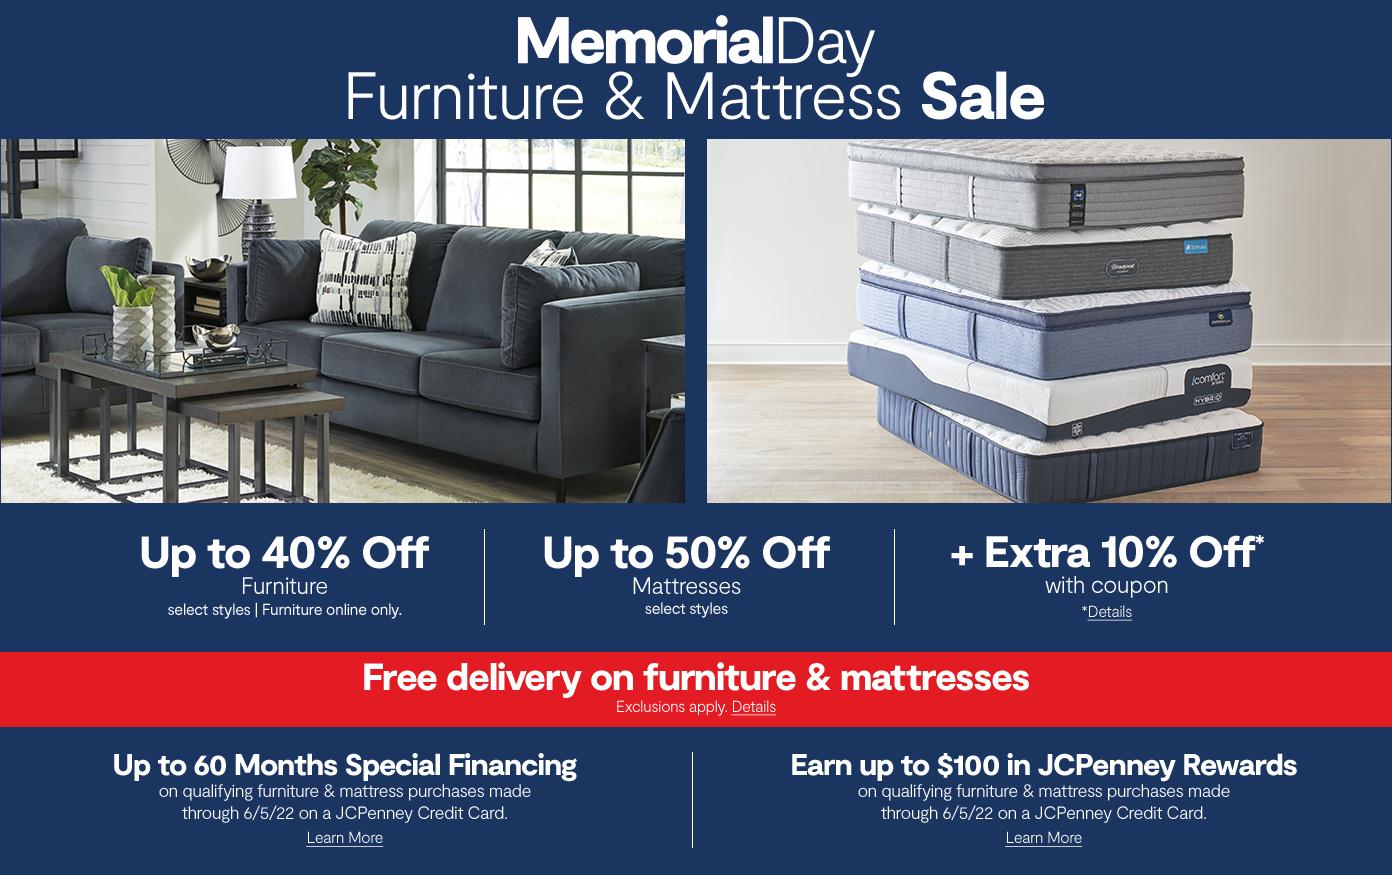 Memorial Day Furniture & Mattress Sale. Up to 40% off furniture. up to 50% off mattresses. free delivery